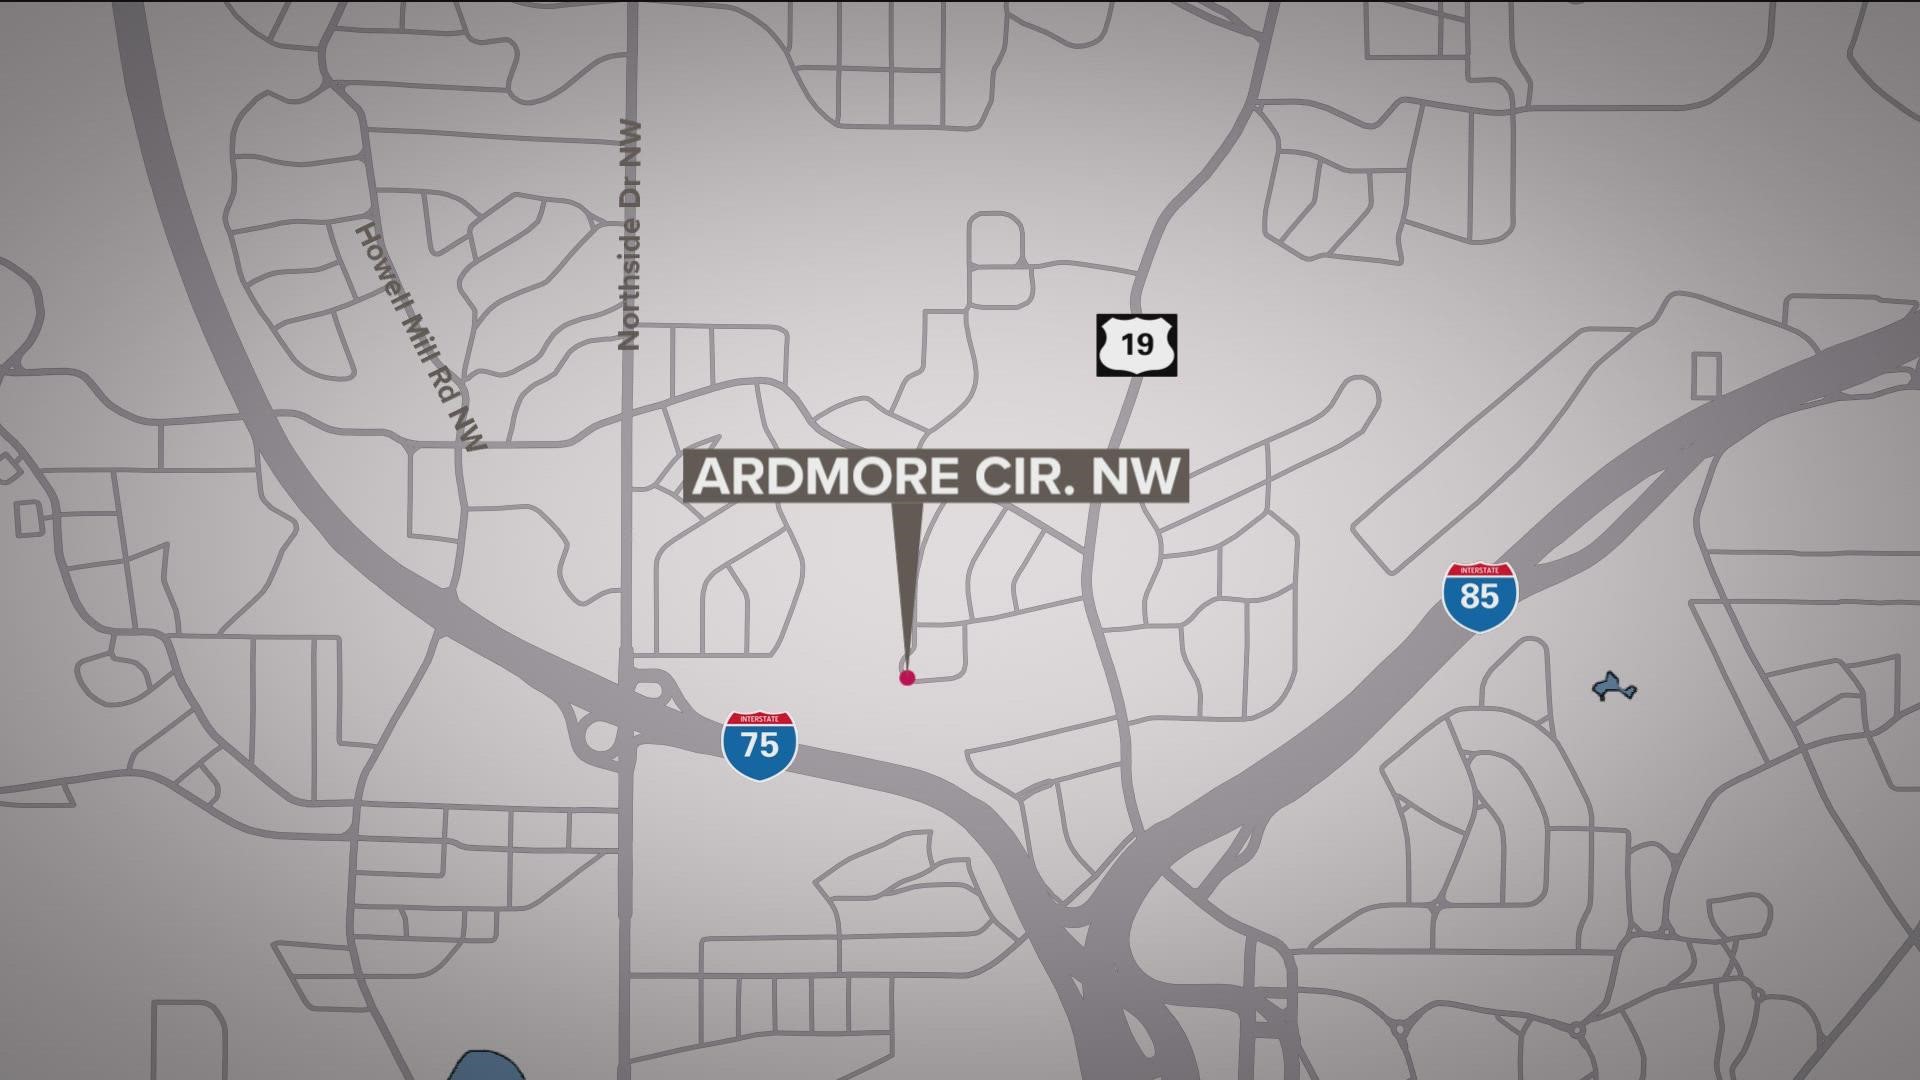 One man was shot and killed Saturday night at an apartment complex at the 300-block of Ardmore Circle.